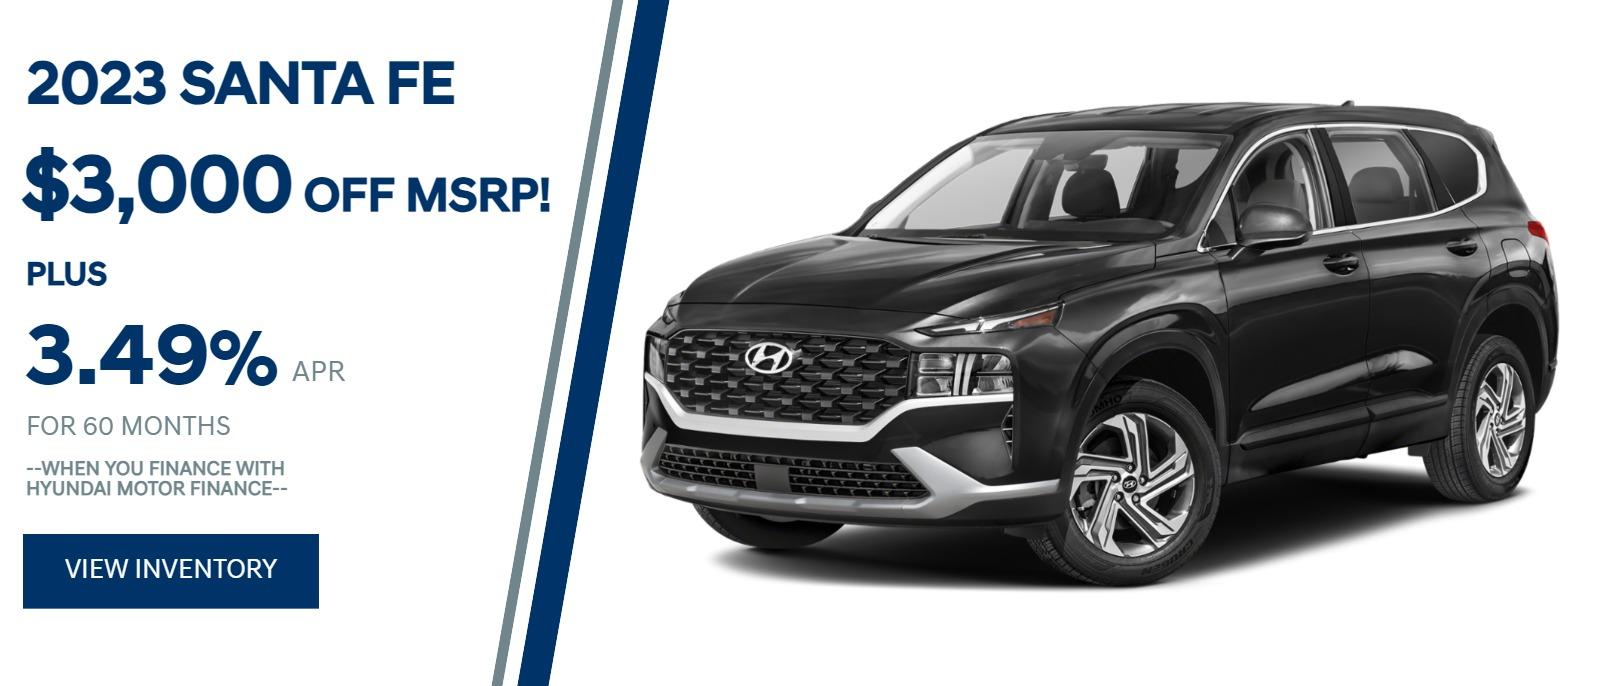 1) 2023 Santa Fe
$3,000 off MSRP!
+ 3.49% APR for 60mo!
--When you finance with Hyundai Motor Finance--